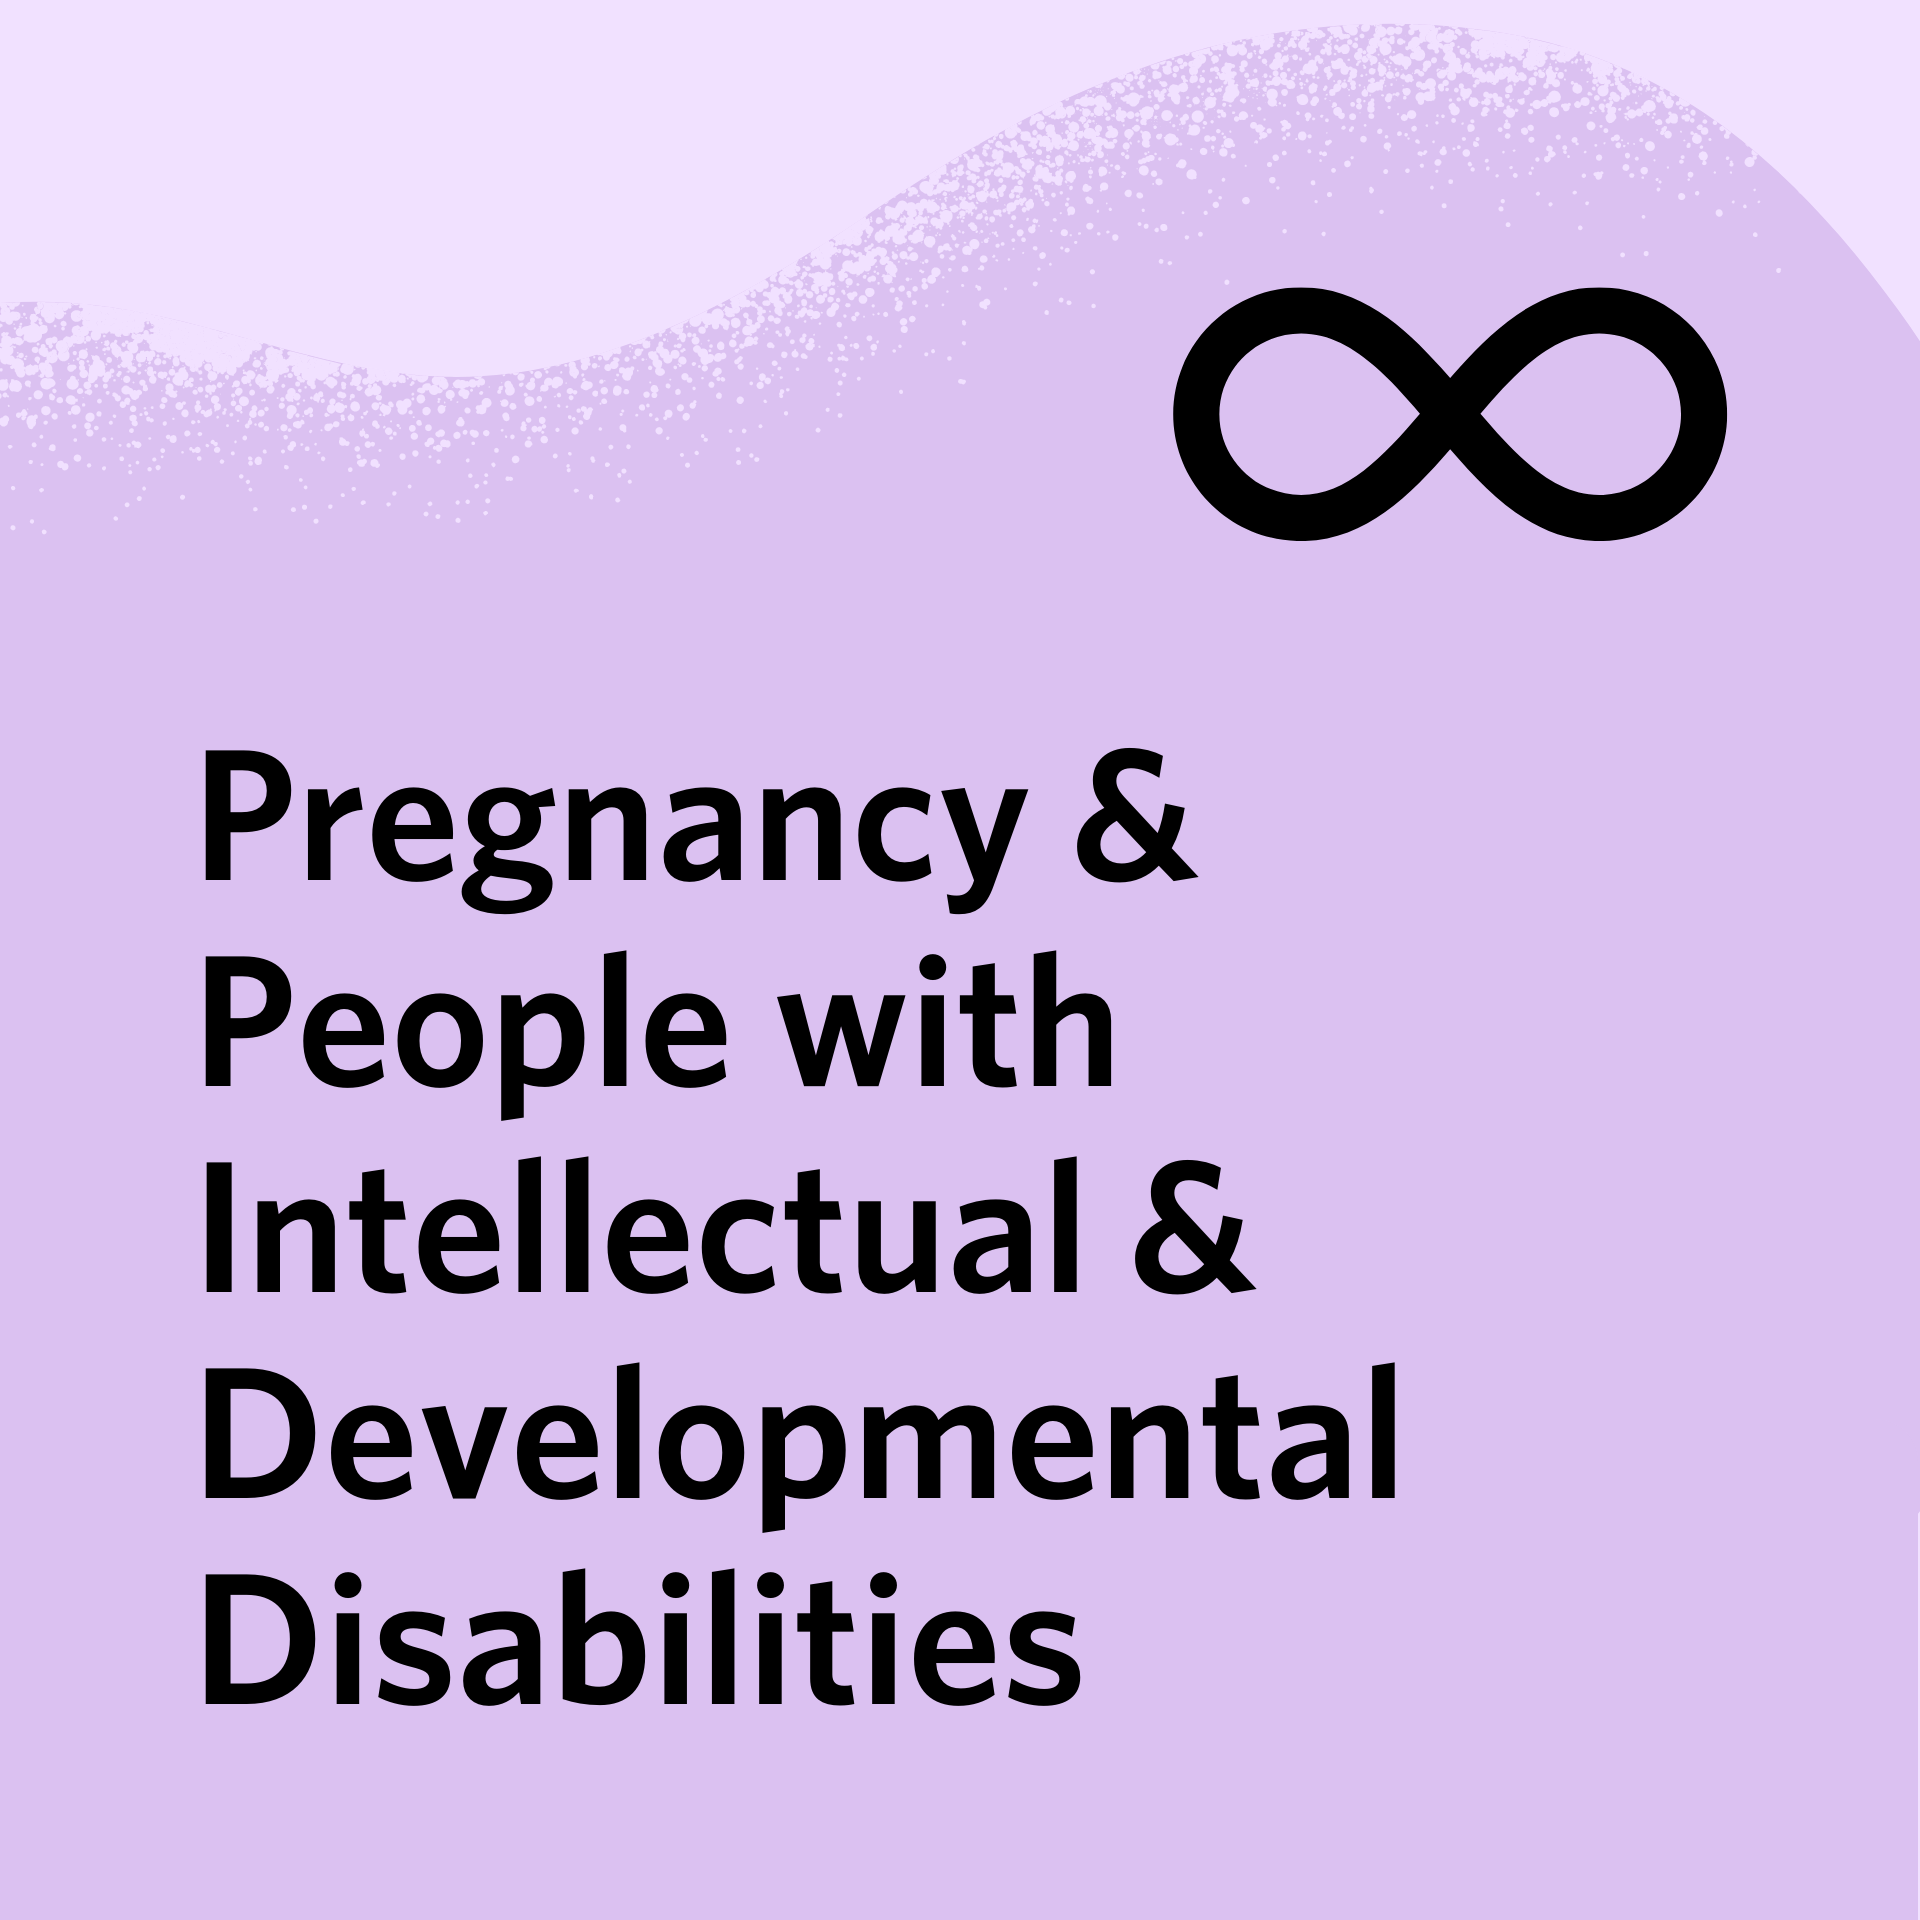 Pregnancy & People with Intellectual & Developmental Disabilities